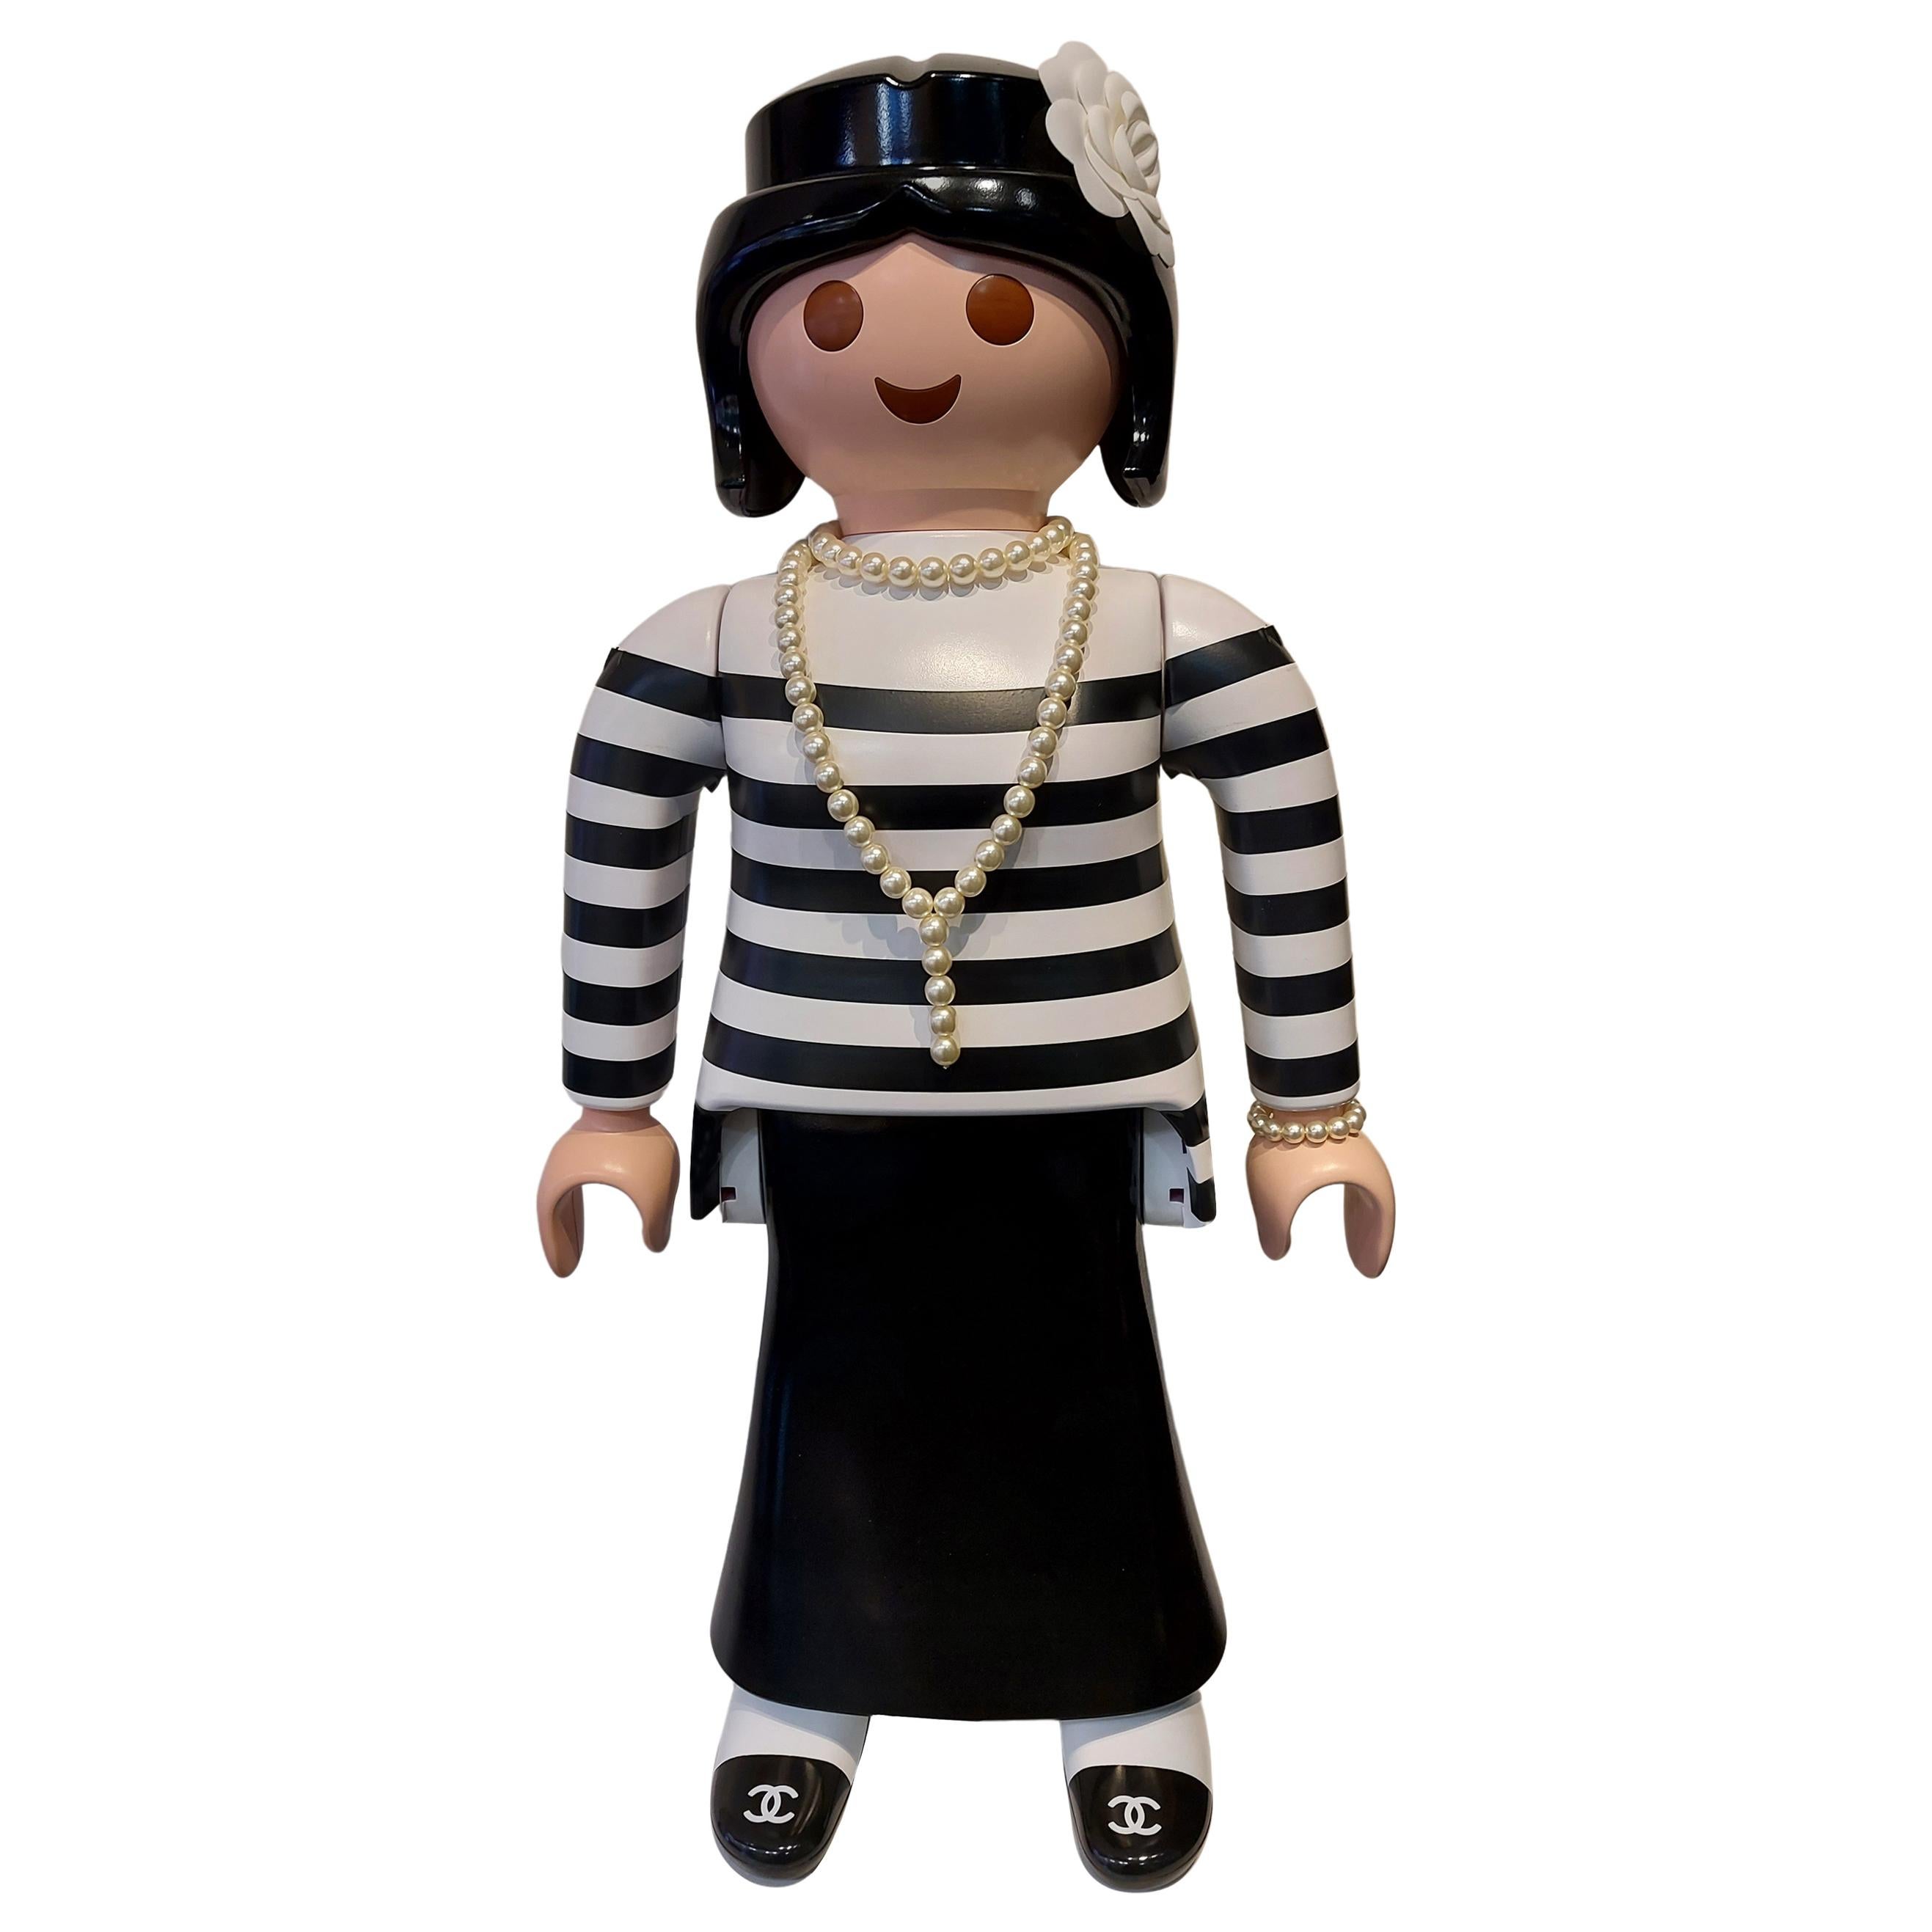 Playmobil / Chanel Figure by Pache "Luxury " Limited Edition Nr. 2/15